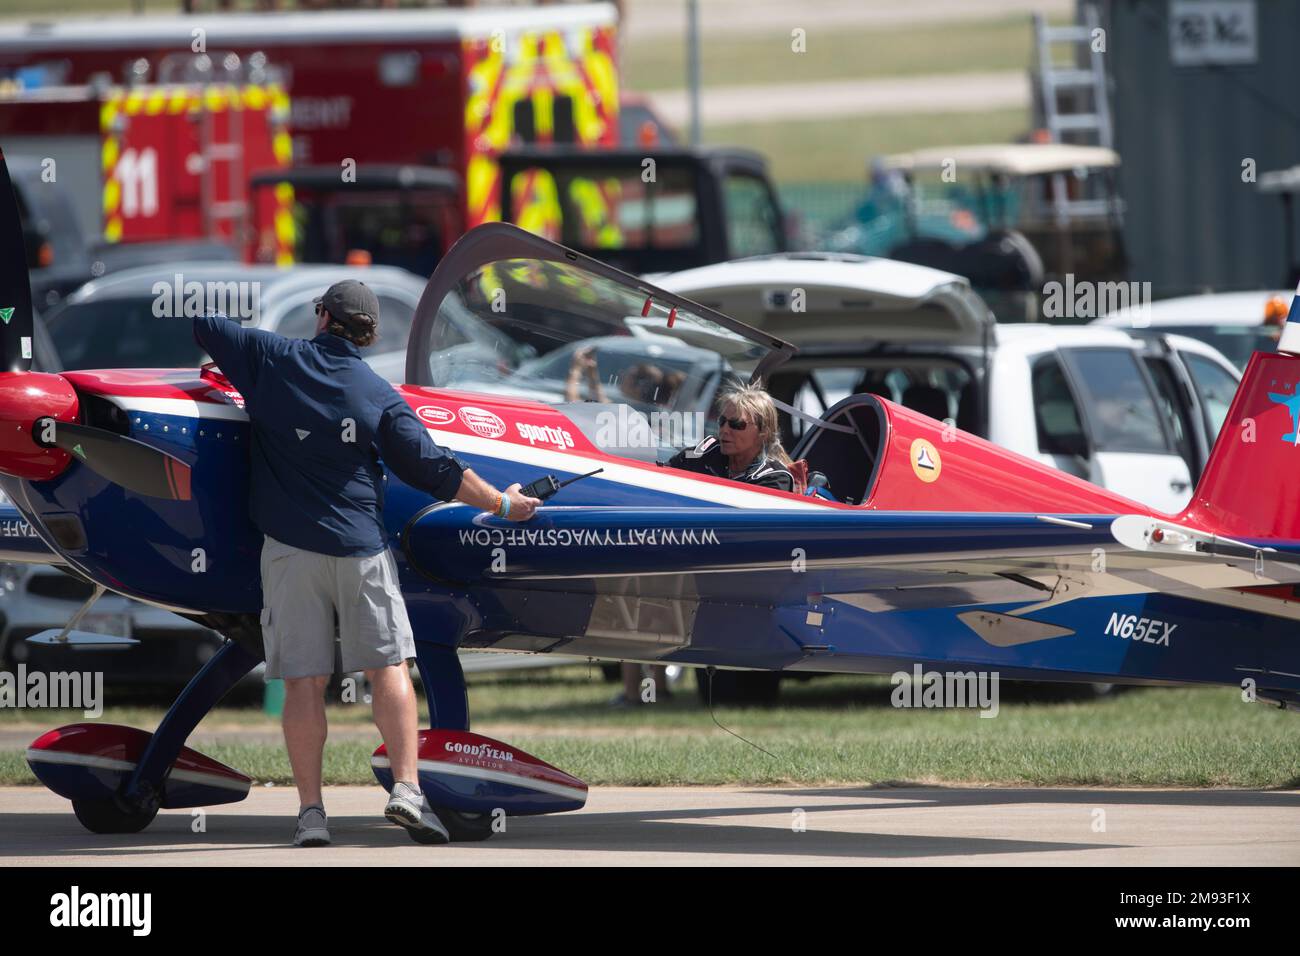 Oshkosh, WI - 27 July 2022: Patty Wagstaff sitting in her plane at an air show. Stock Photo